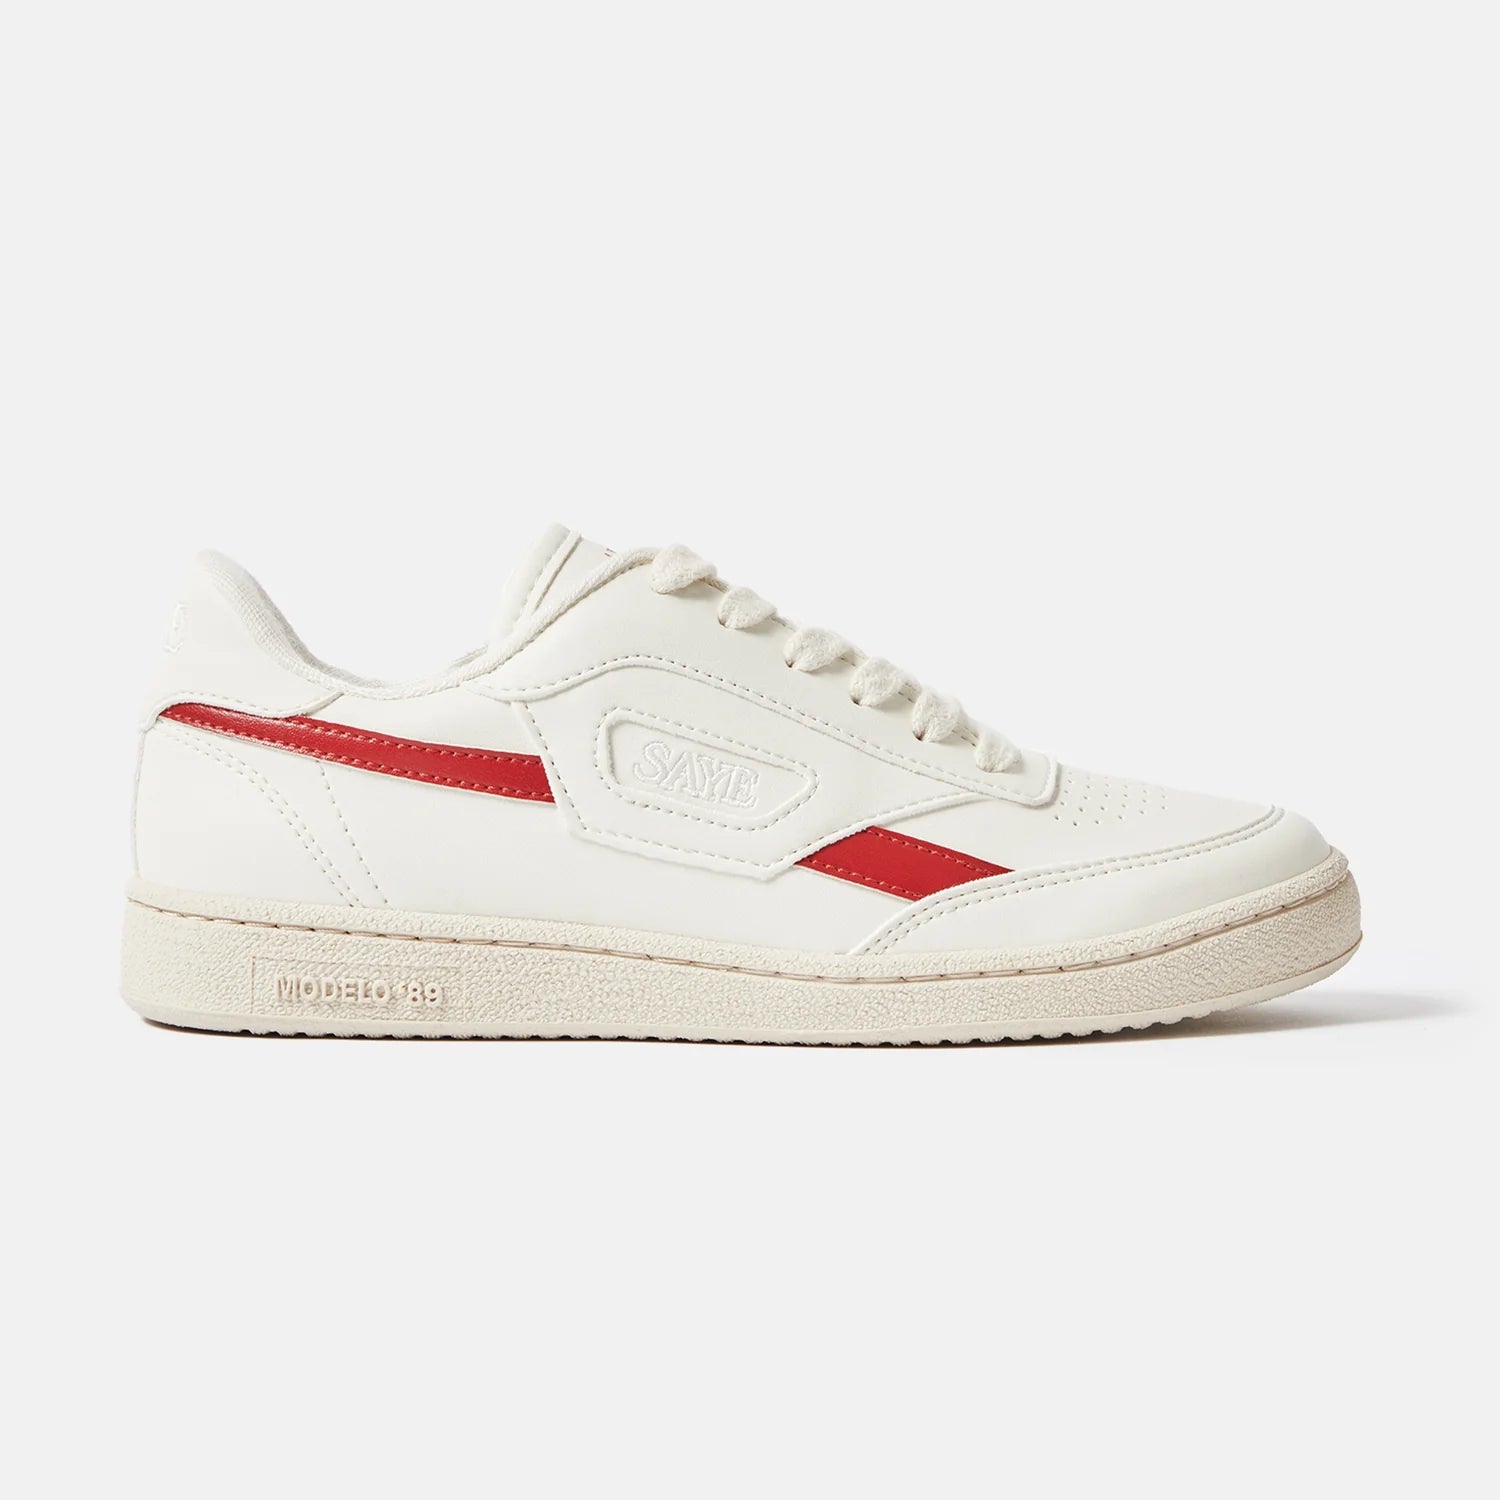 A pair of SAYE Modelo '89 sneakers with red accents, made from vegan Napa material.